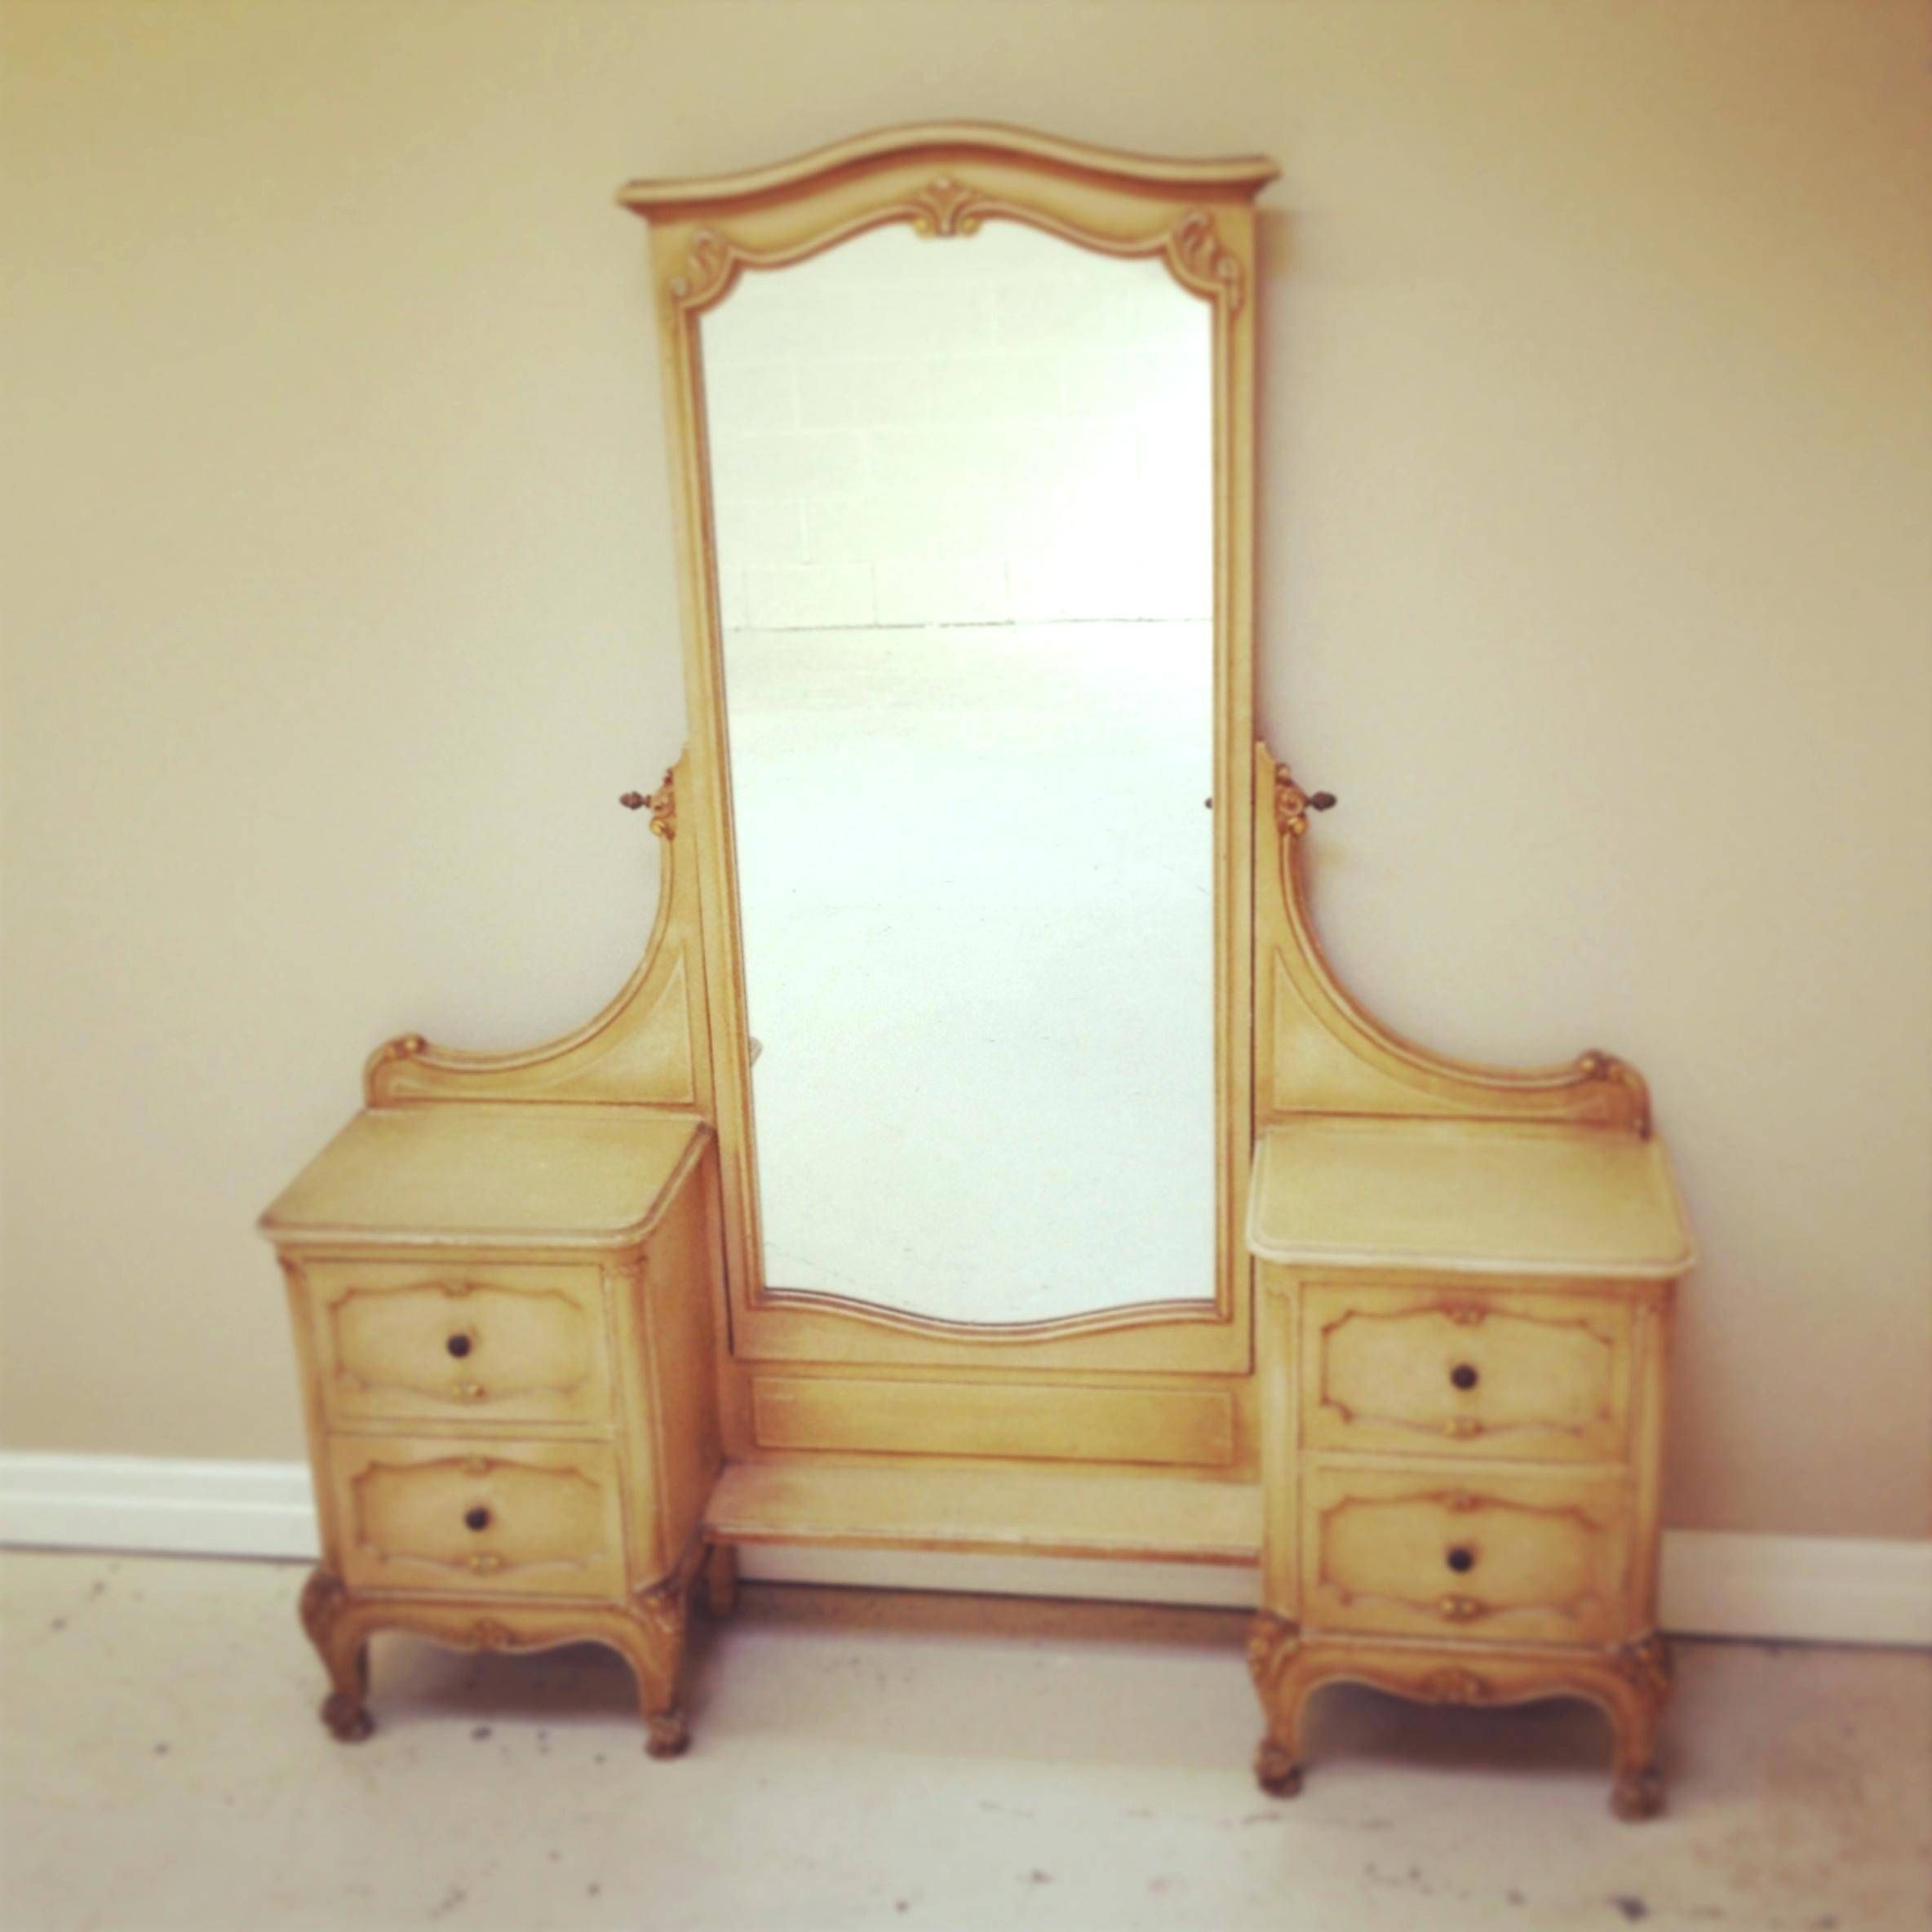 Vintage French Dressing Table Long Mirrorlarge Mirror On Stand In Antique Full Length Mirrors (View 23 of 25)